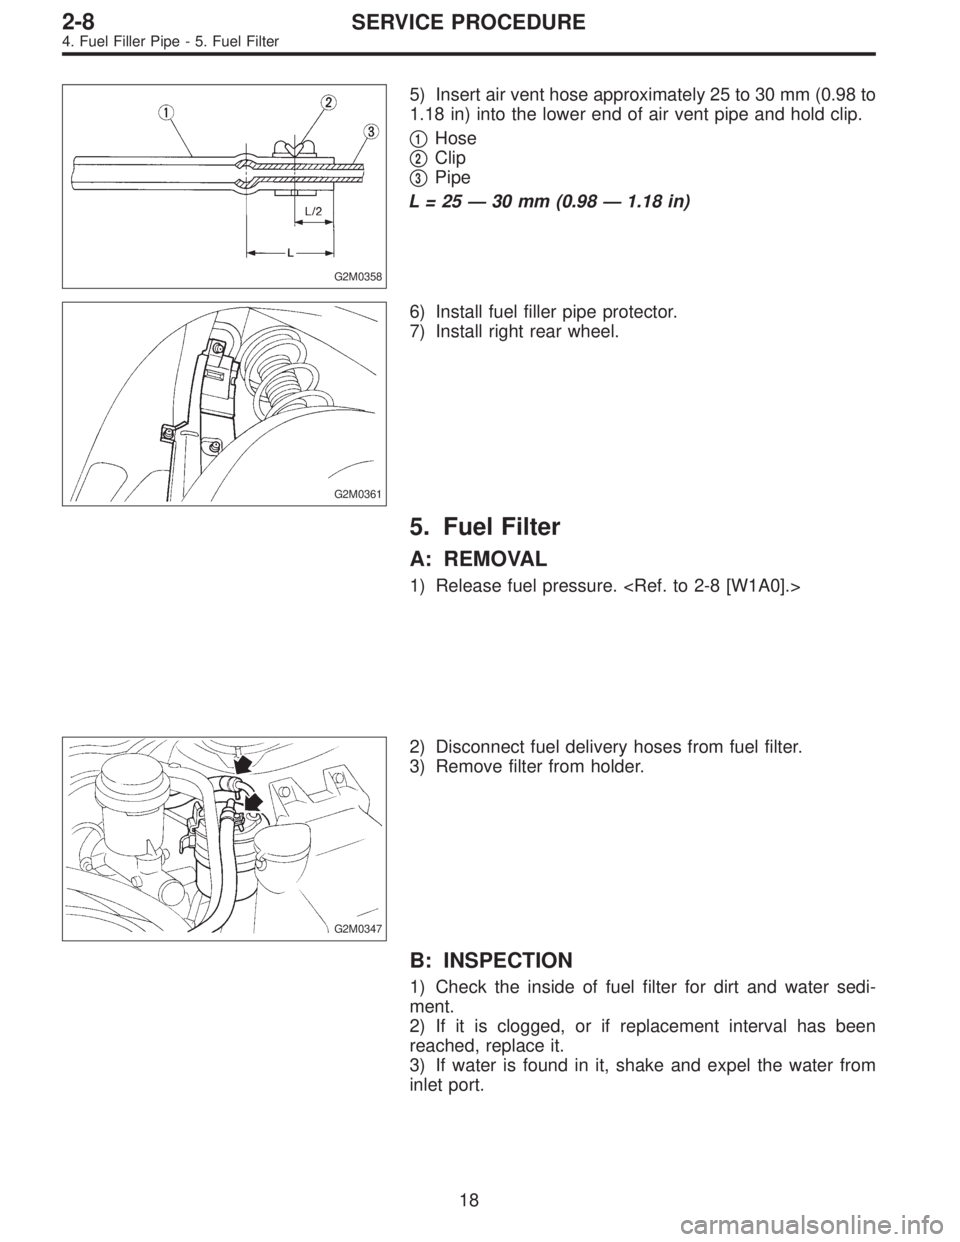 SUBARU LEGACY 1997  Service Repair Manual G2M0358
5) Insert air vent hose approximately 25 to 30 mm (0.98 to
1.18 in) into the lower end of air vent pipe and hold clip.

1Hose

2Clip

3Pipe
L=25—30 mm (0.98—1.18 in)
G2M0361
6) Install 